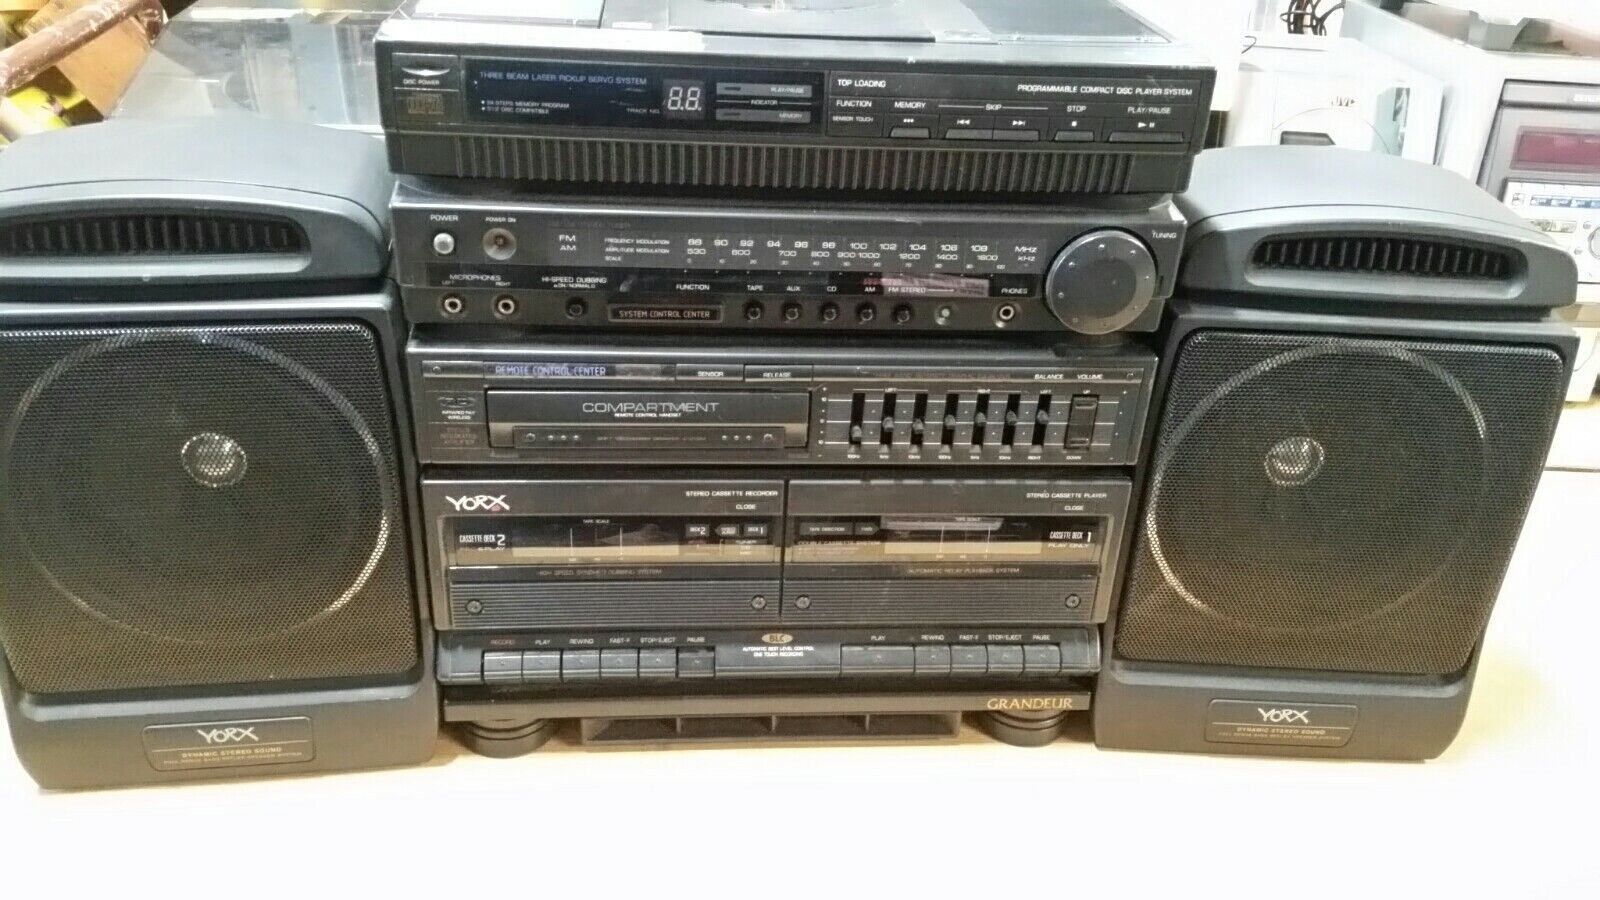 Vintage YORX Stereo AM FM CD Double Tape With Remote Model2307 4parts  (E160W2)